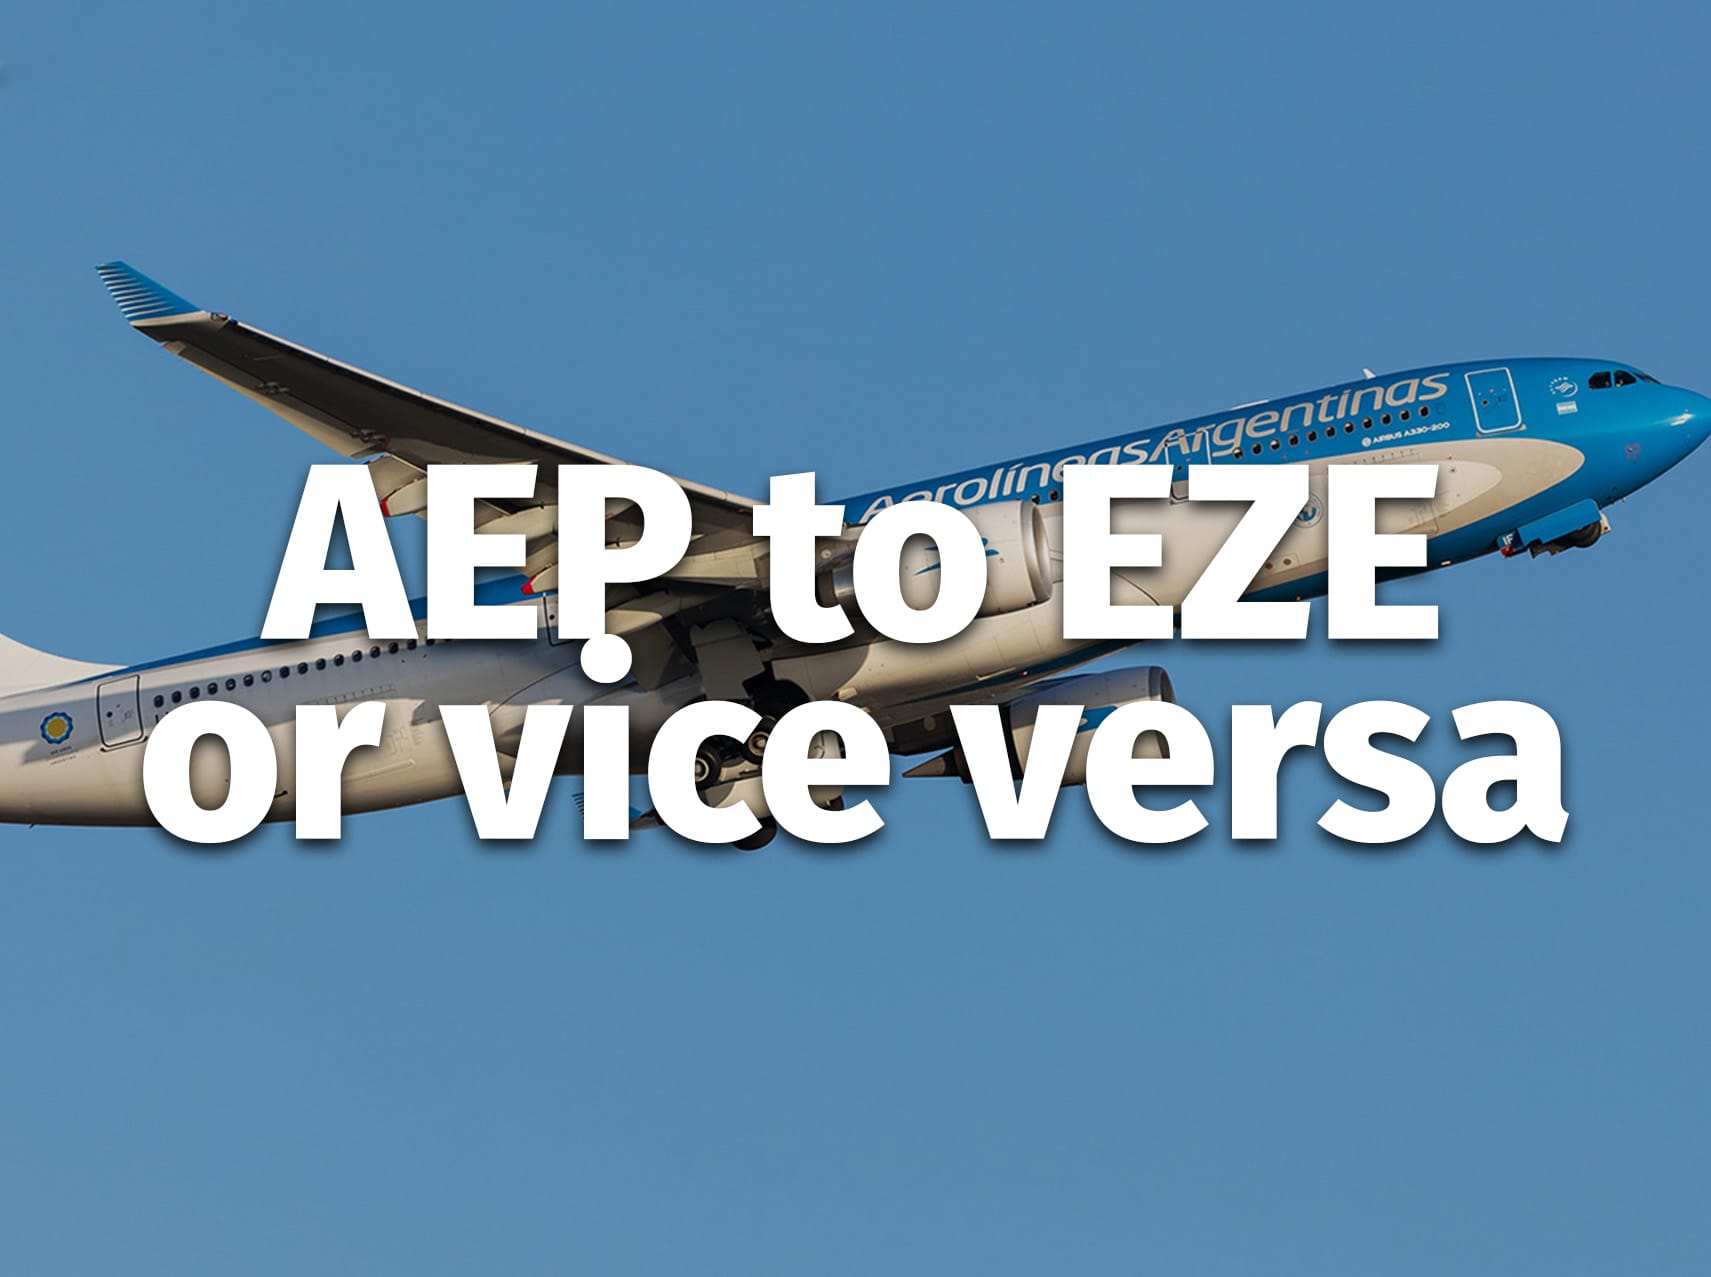 AEP to EZE airport transfer Buenos Aires international domestic